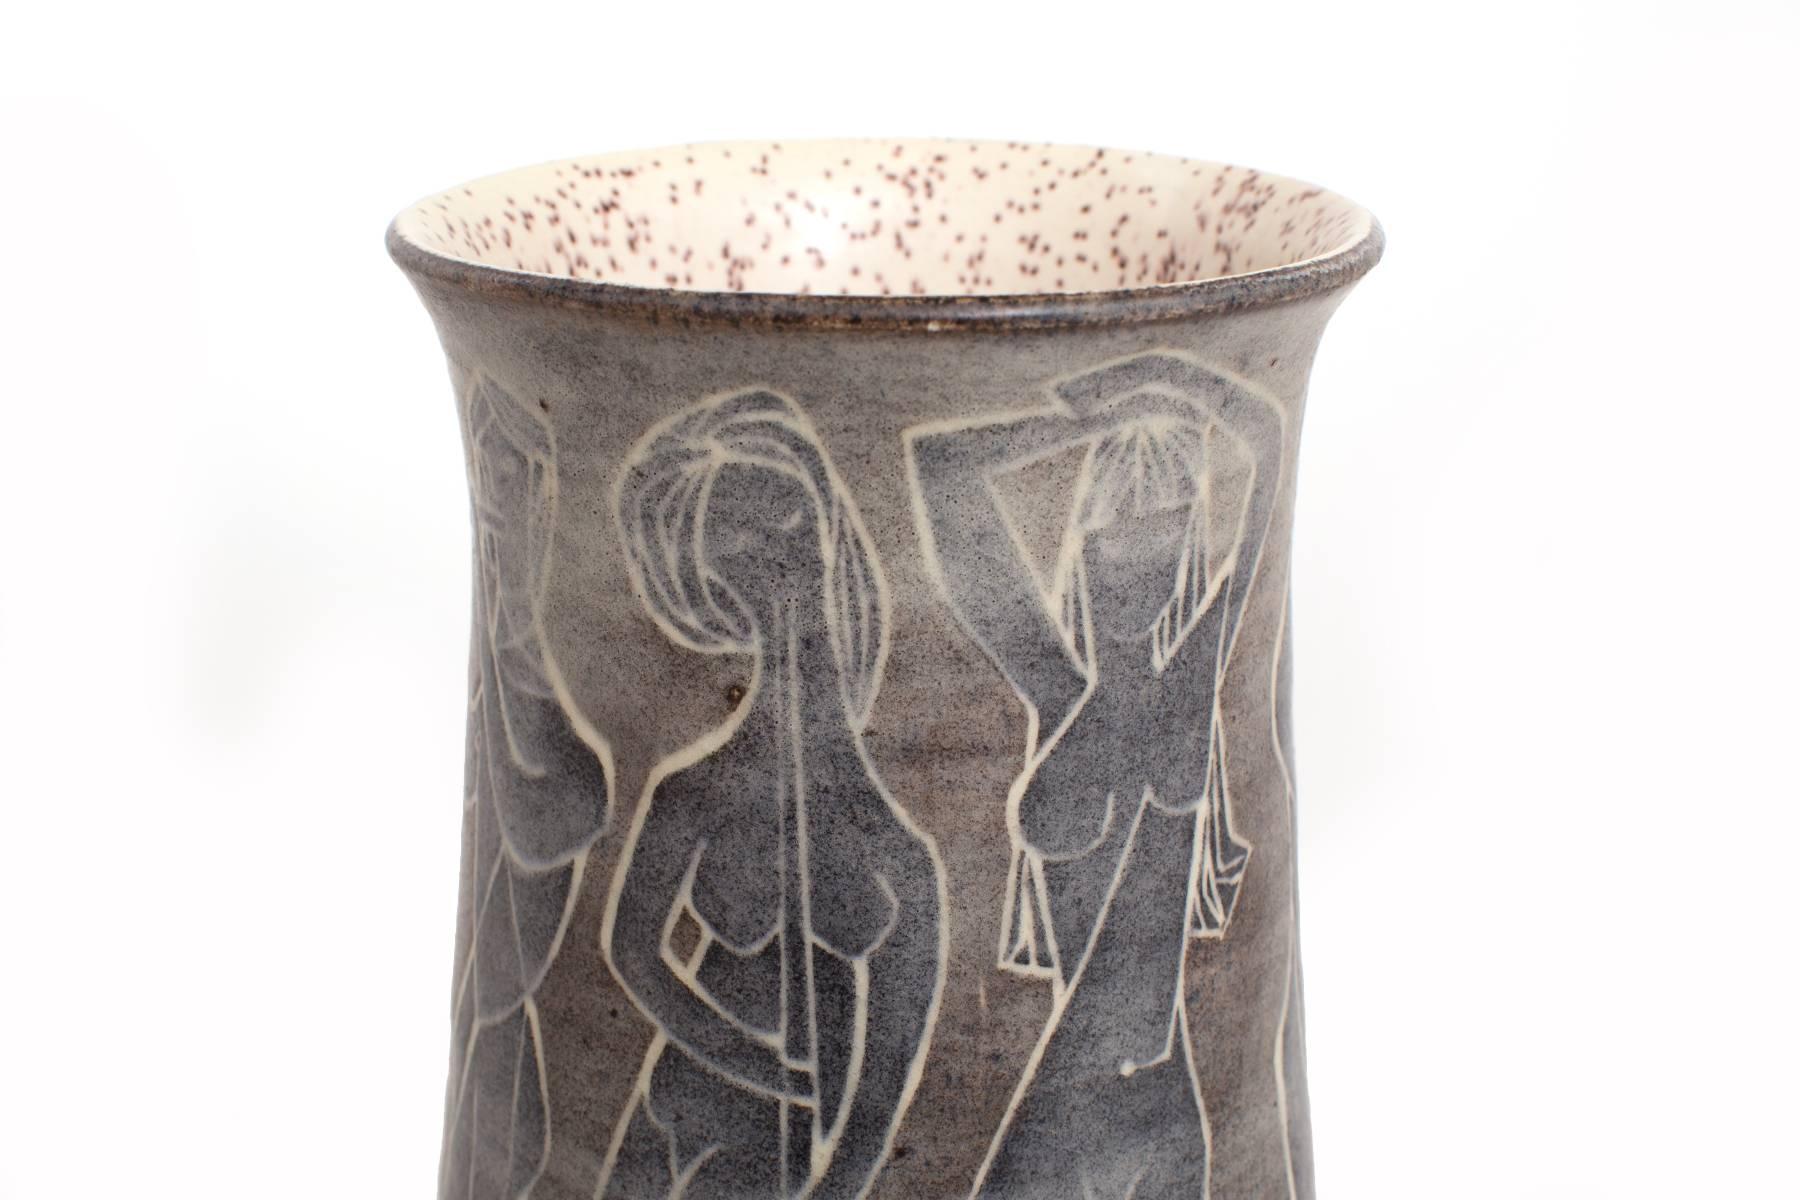 Marcello Fantoni glazed ceramic vessel, circa early 1960s. This fabulous example has hand painted female figures around the exterior and a speckled glaze on the inside.